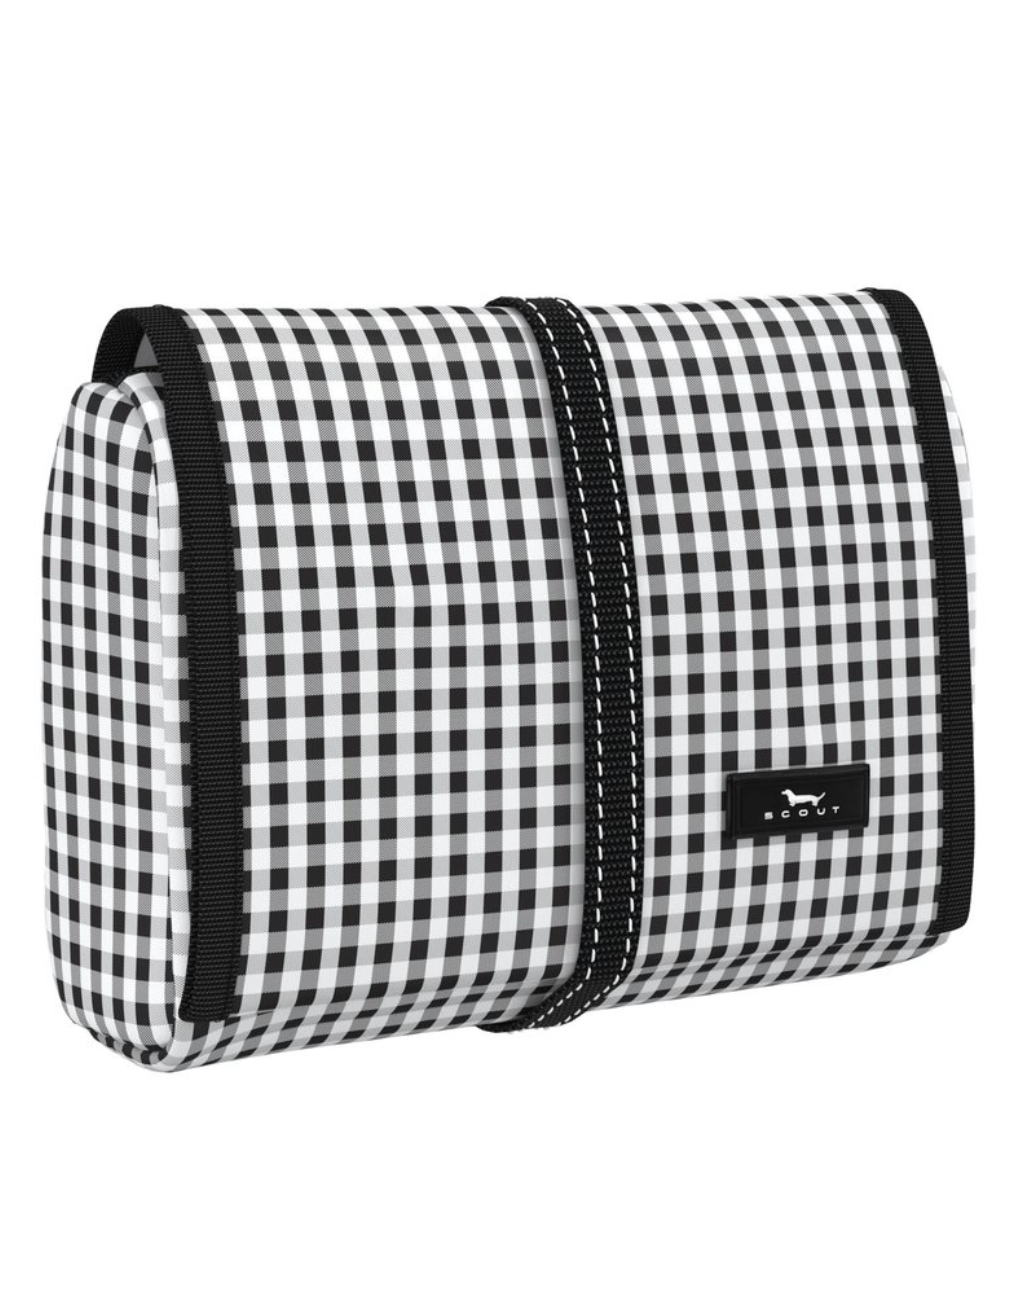 Scout Beauty Burrito Toiletry Bag Travel Accessories in David Checkam at Wrapsody